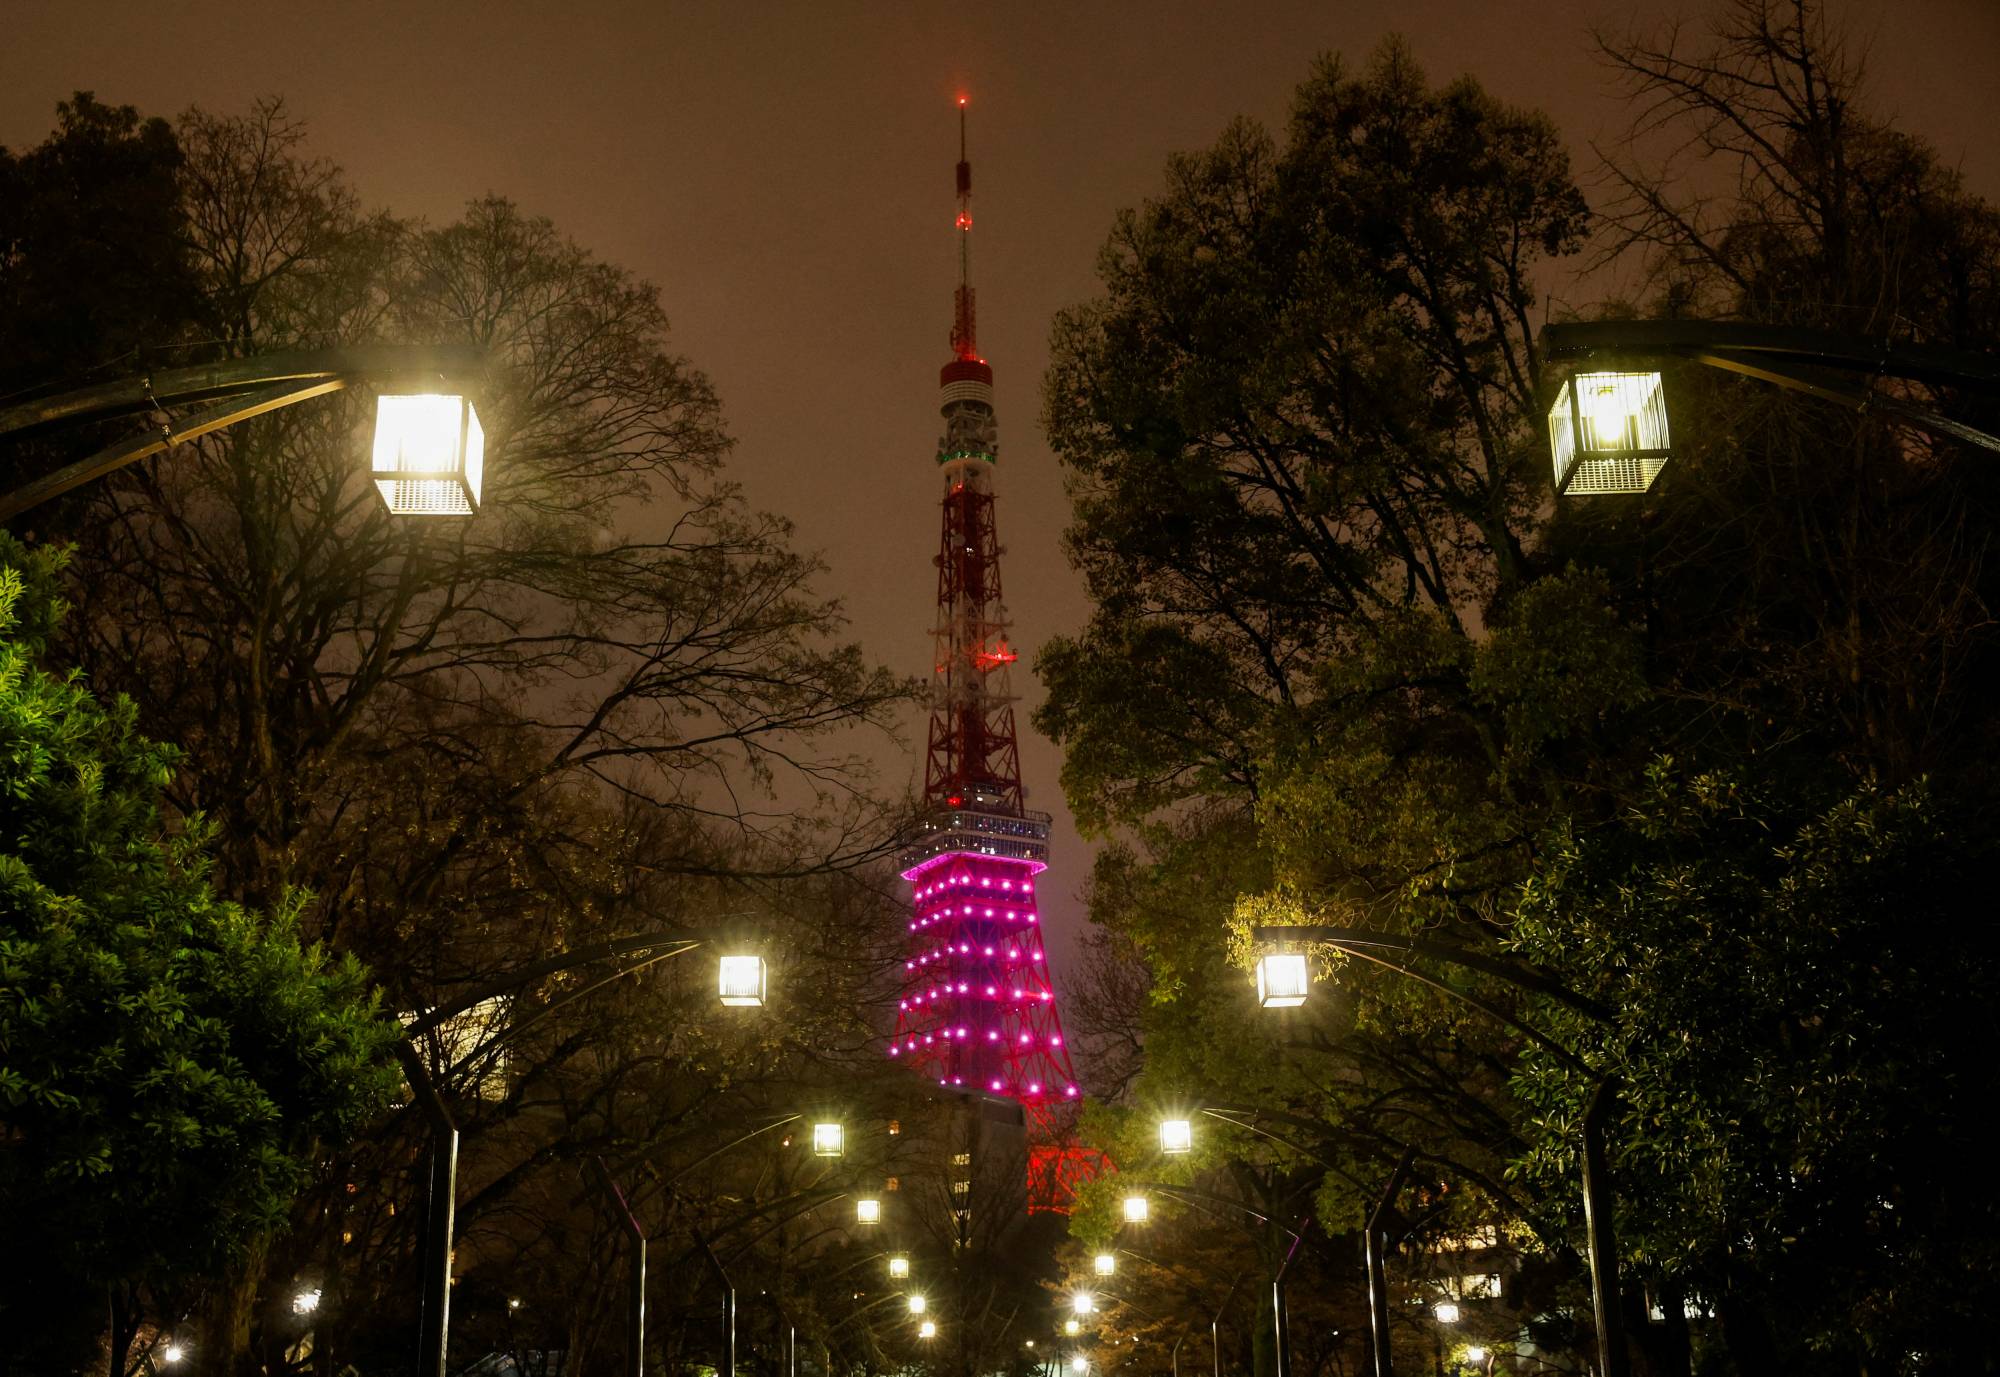 Tokyo Tower is illuminated only in the lower-half part in response to the government’s request to save electricity in Tokyo, Japan on 22 March 2022. Photo: Issei Kato / REUTERS